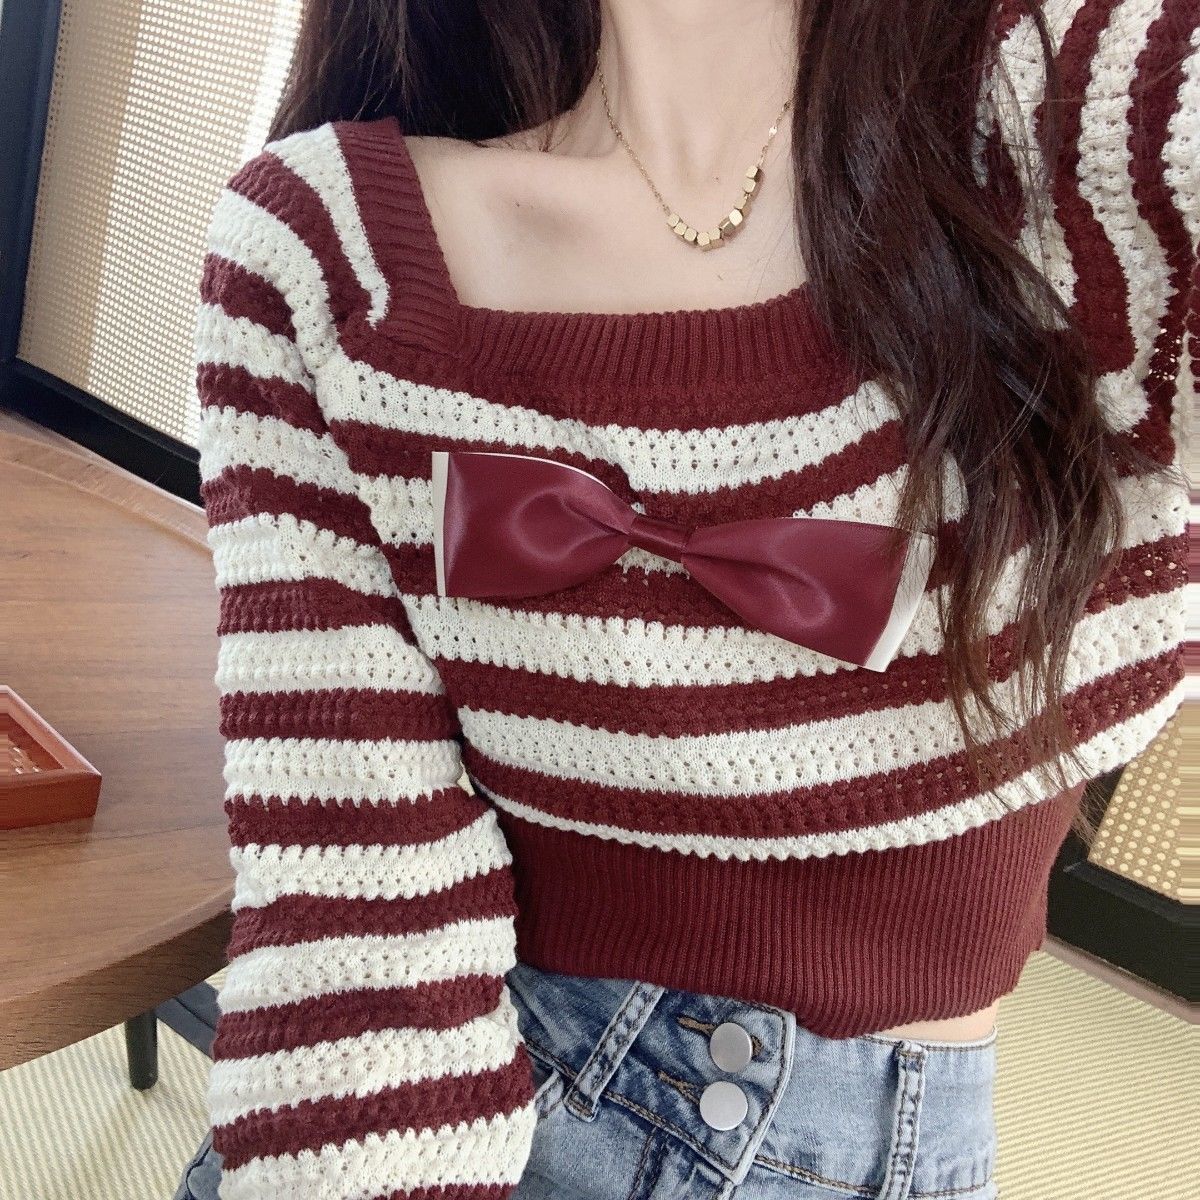 Western style all-match striped long-sleeved top women's autumn new slim-fit short waist bottoming knitted sweater sweater